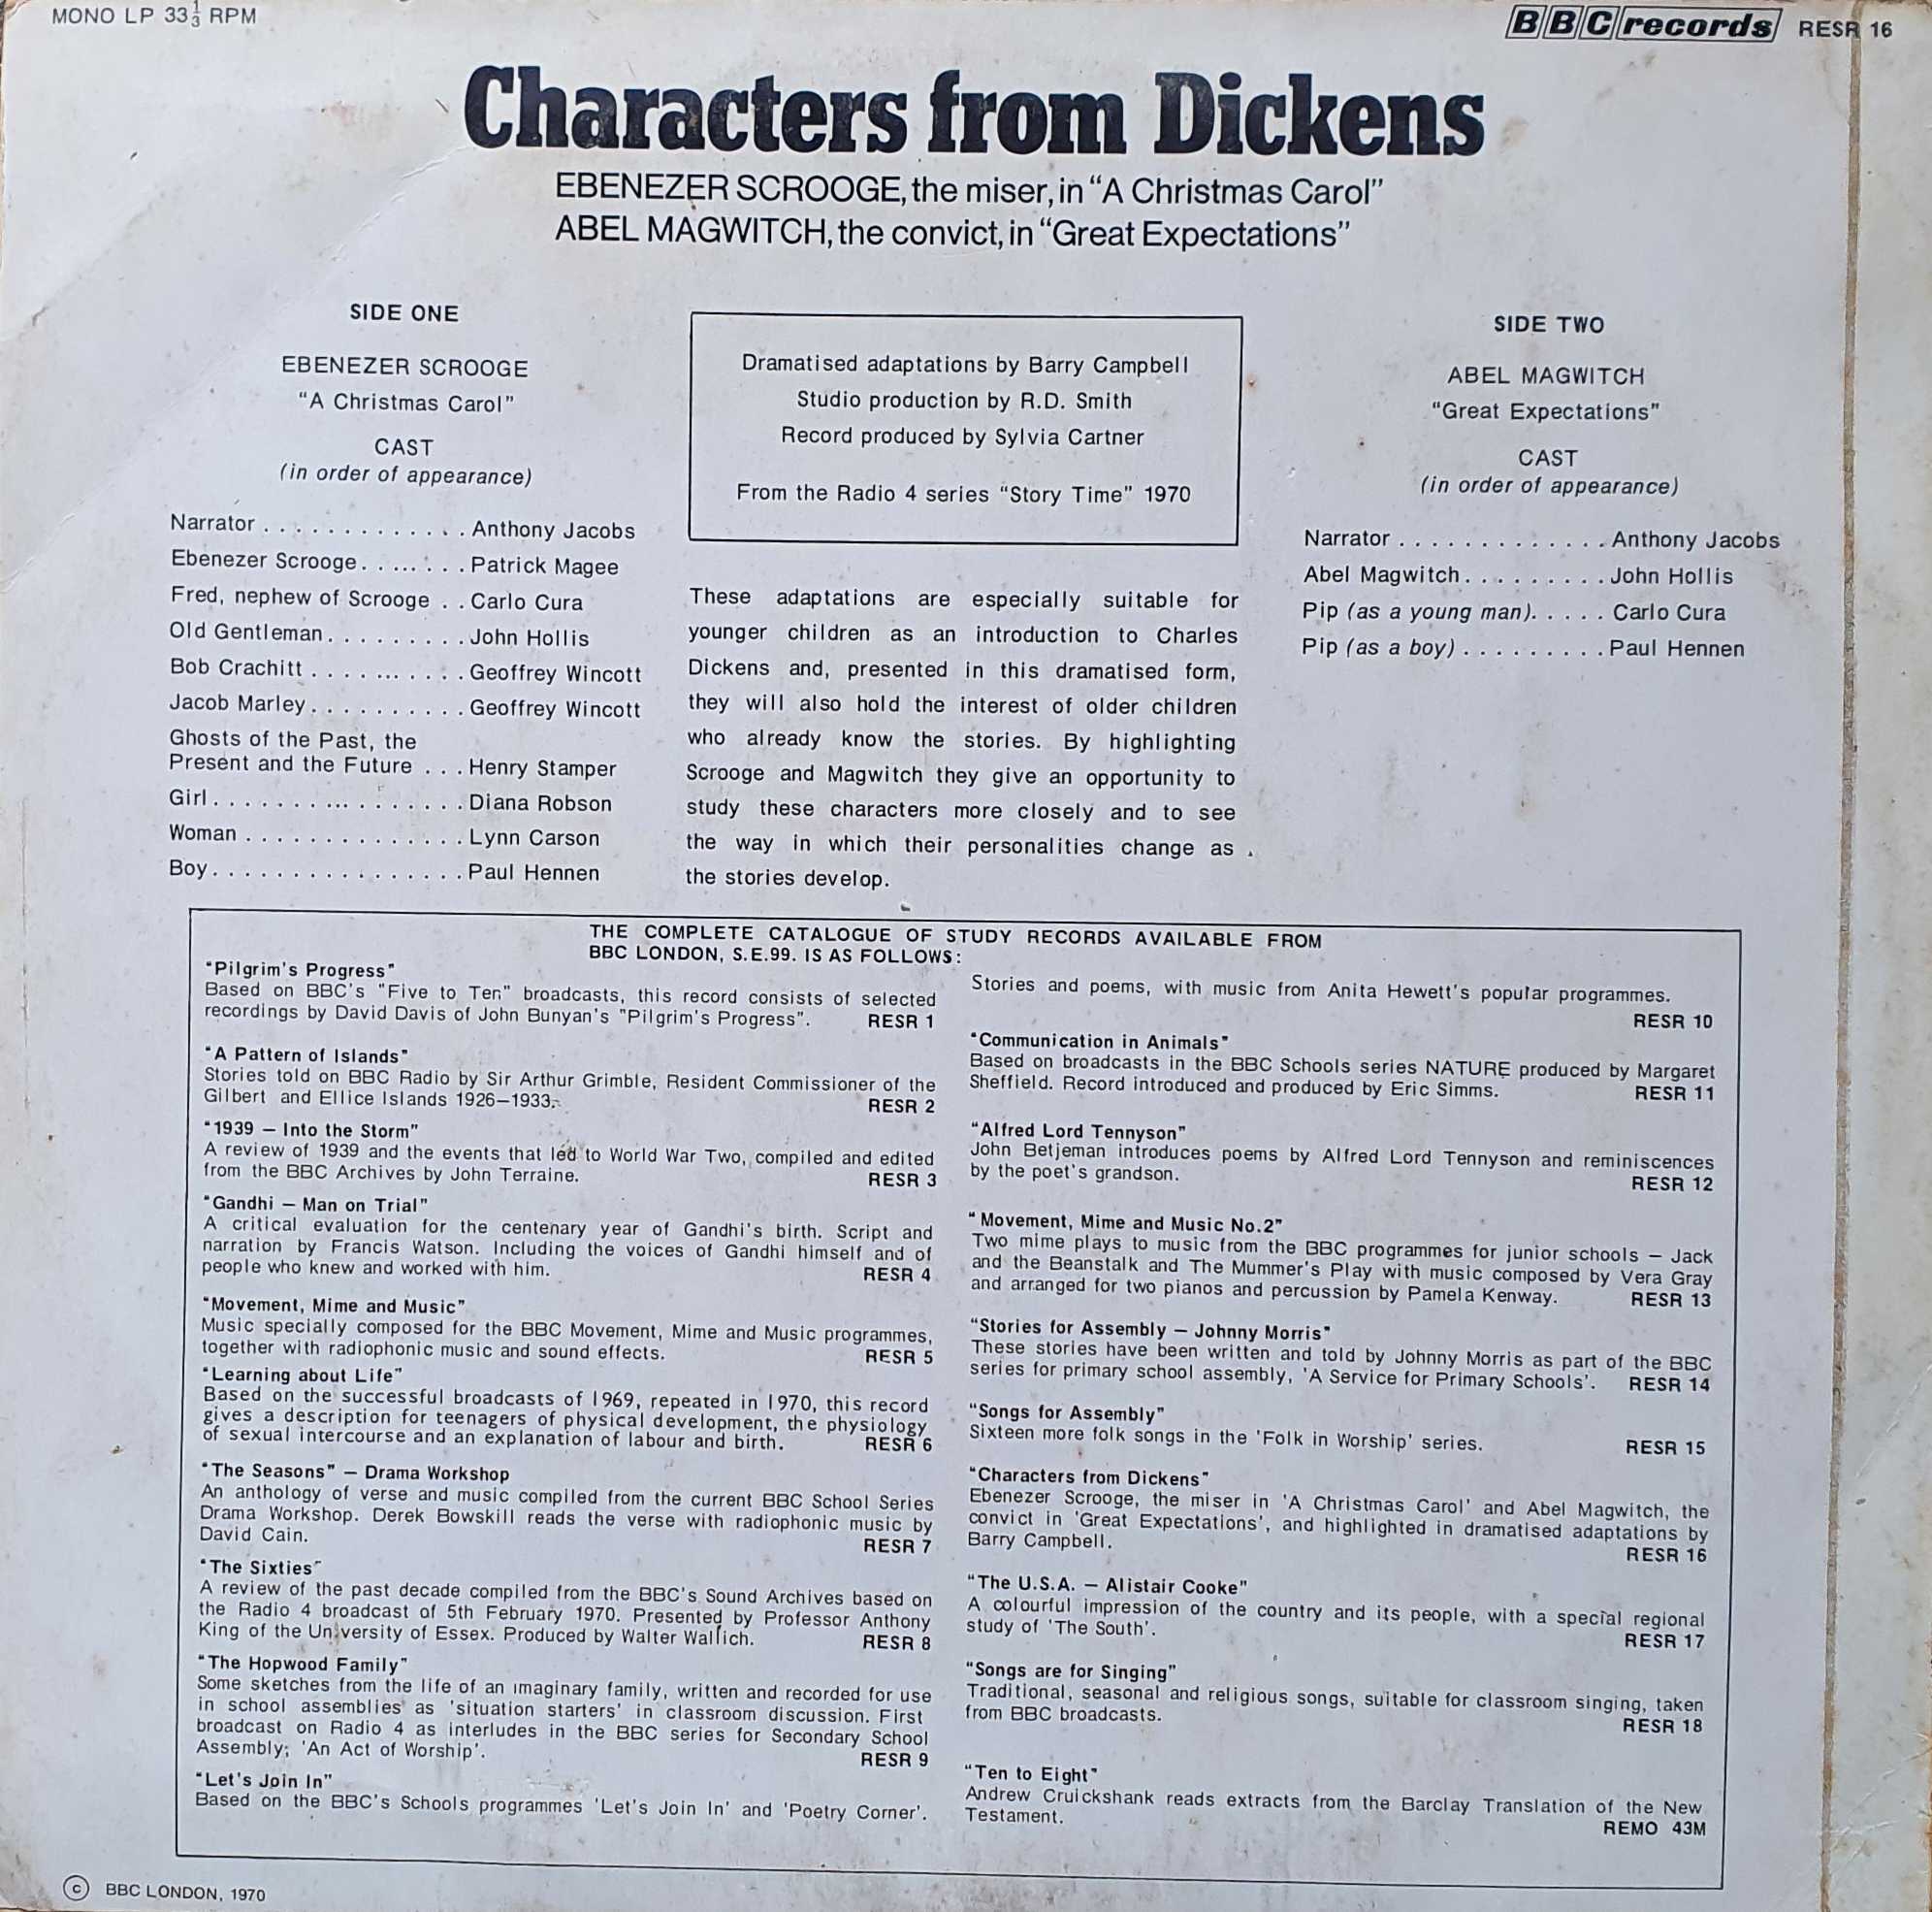 Picture of RESR 16 Characters from Dickens by artist Patrick Magee / John Hollis from the BBC records and Tapes library